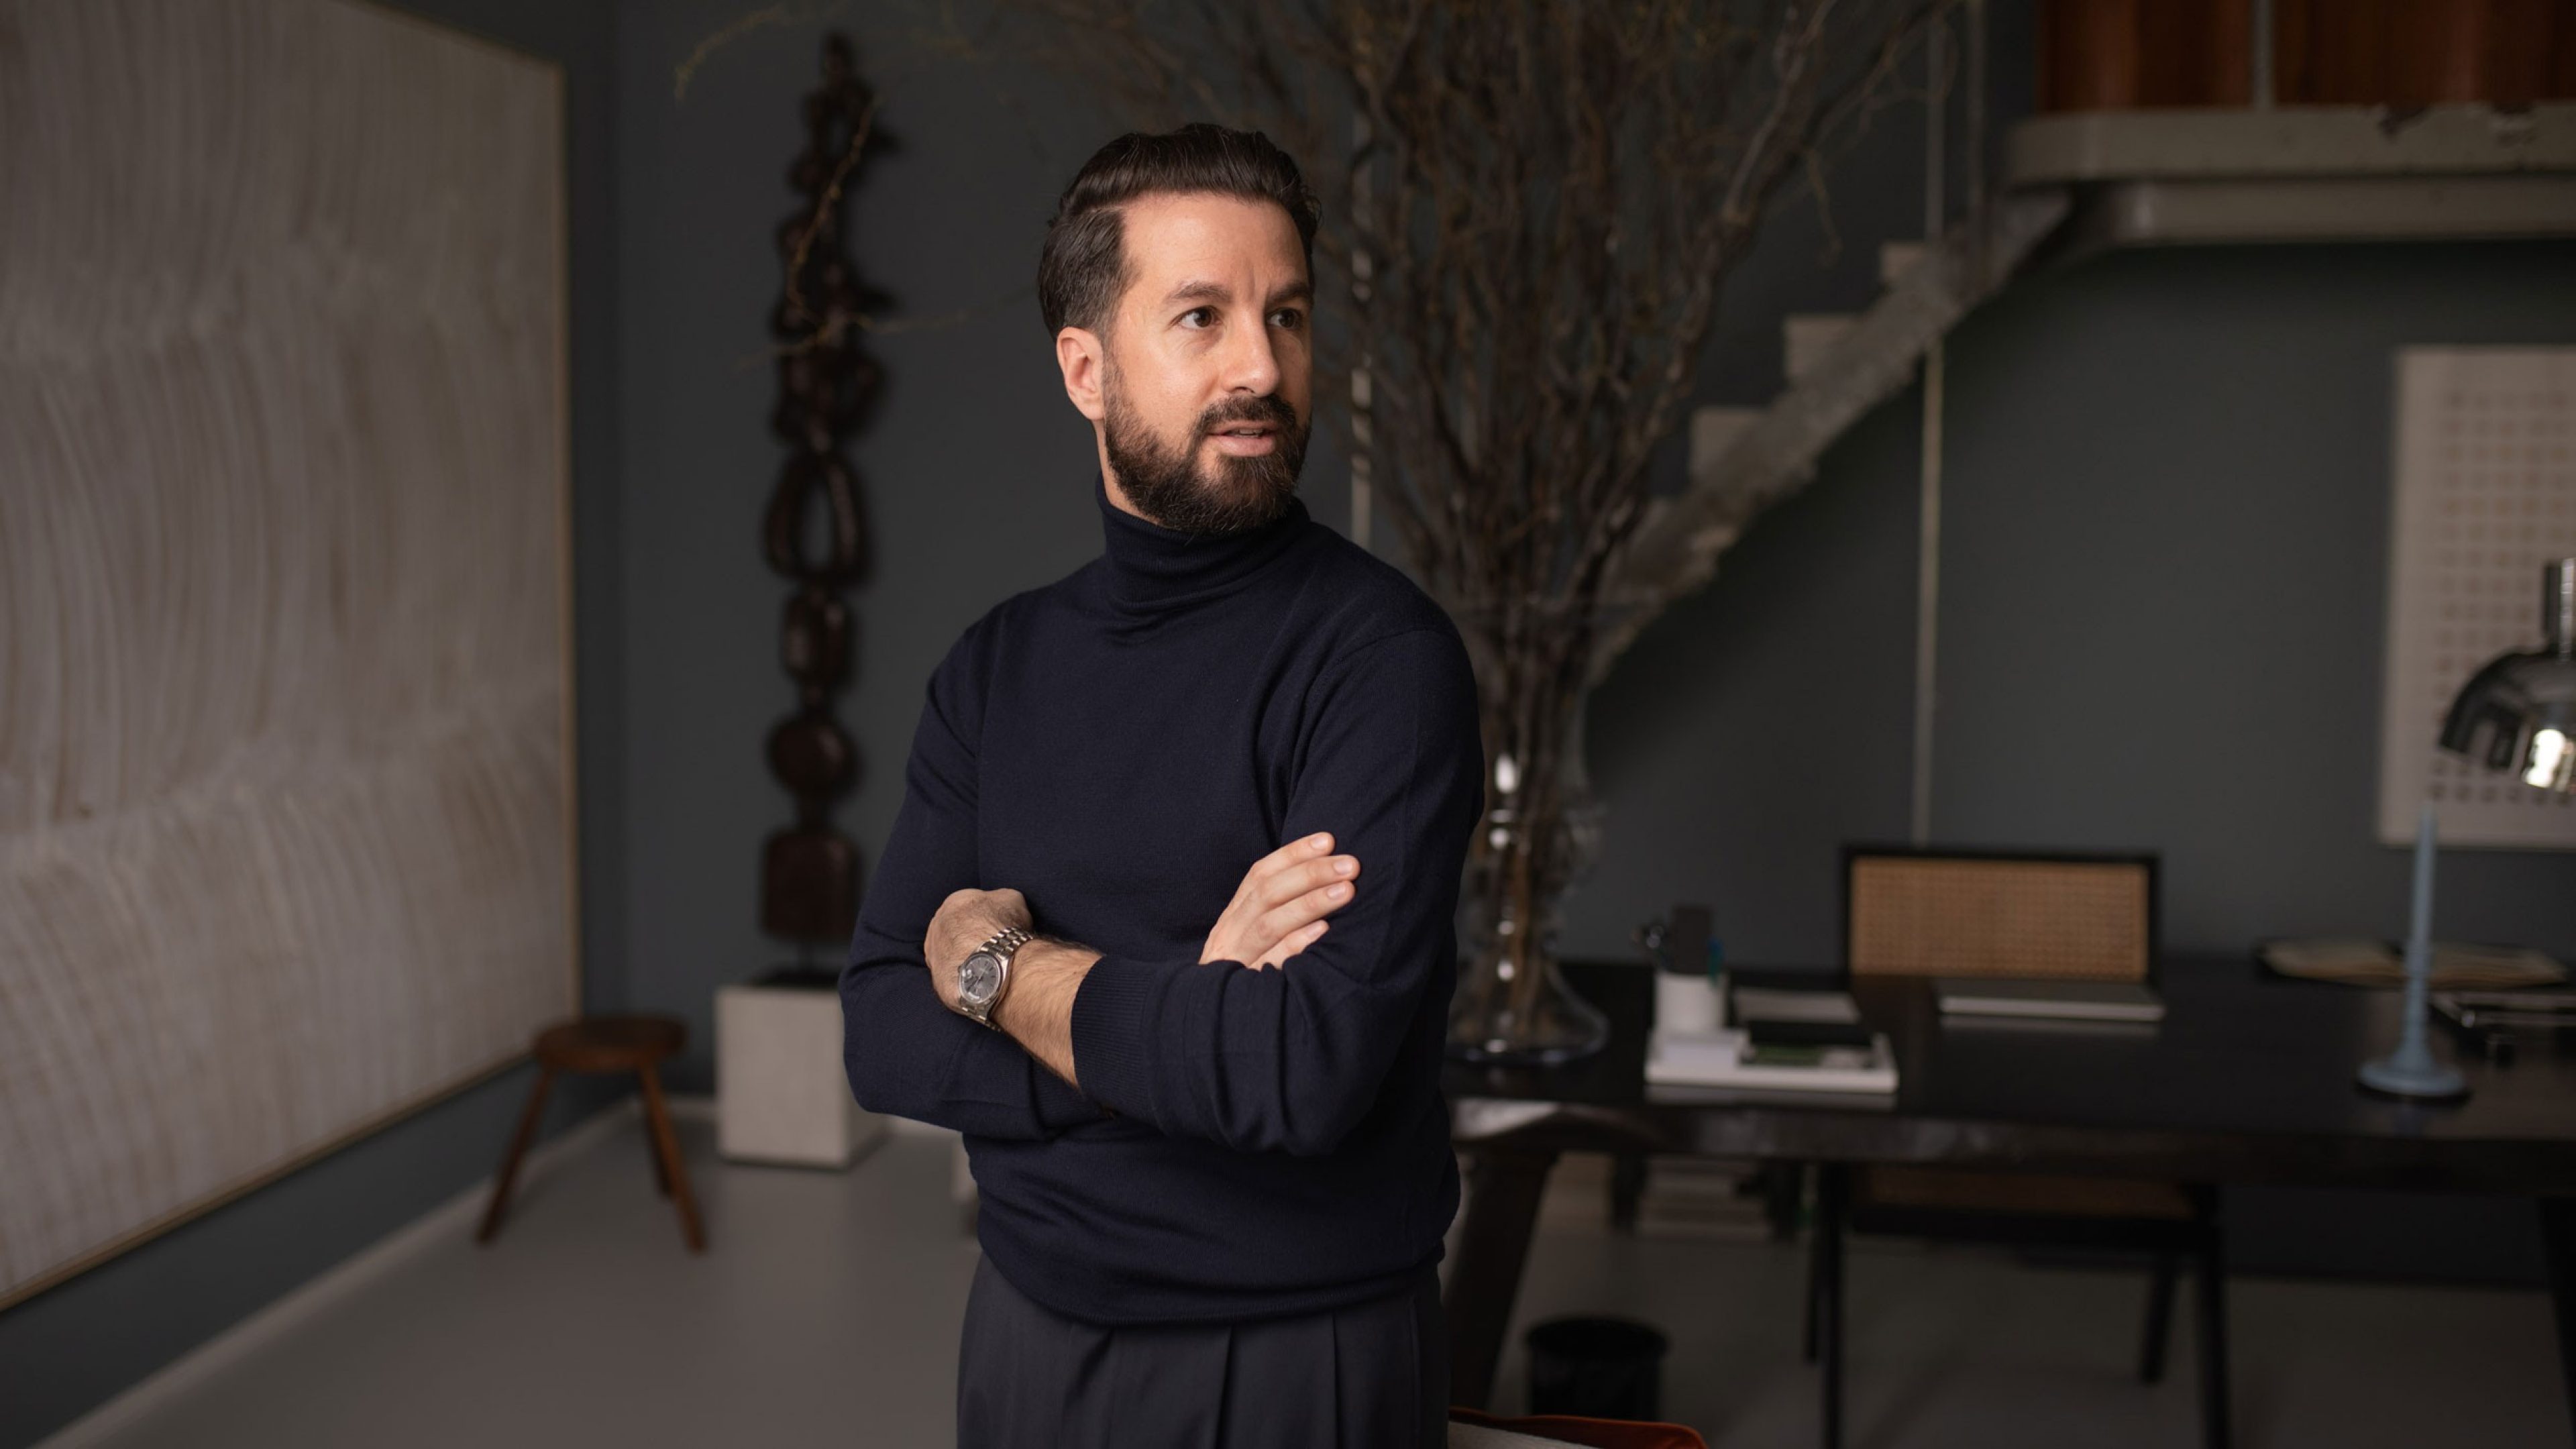 A man in a dark polo-neck pullover stands with his arms folded in a stylishly furnished office. He wears a watch and looks thoughtfully to the side. A large desk with minimalist office accessories is visible in the background. A staircase leads upstairs, next to which an abstract work of art and a large, dry branch in a vase serve as decorations. The atmosphere is modern and professional.